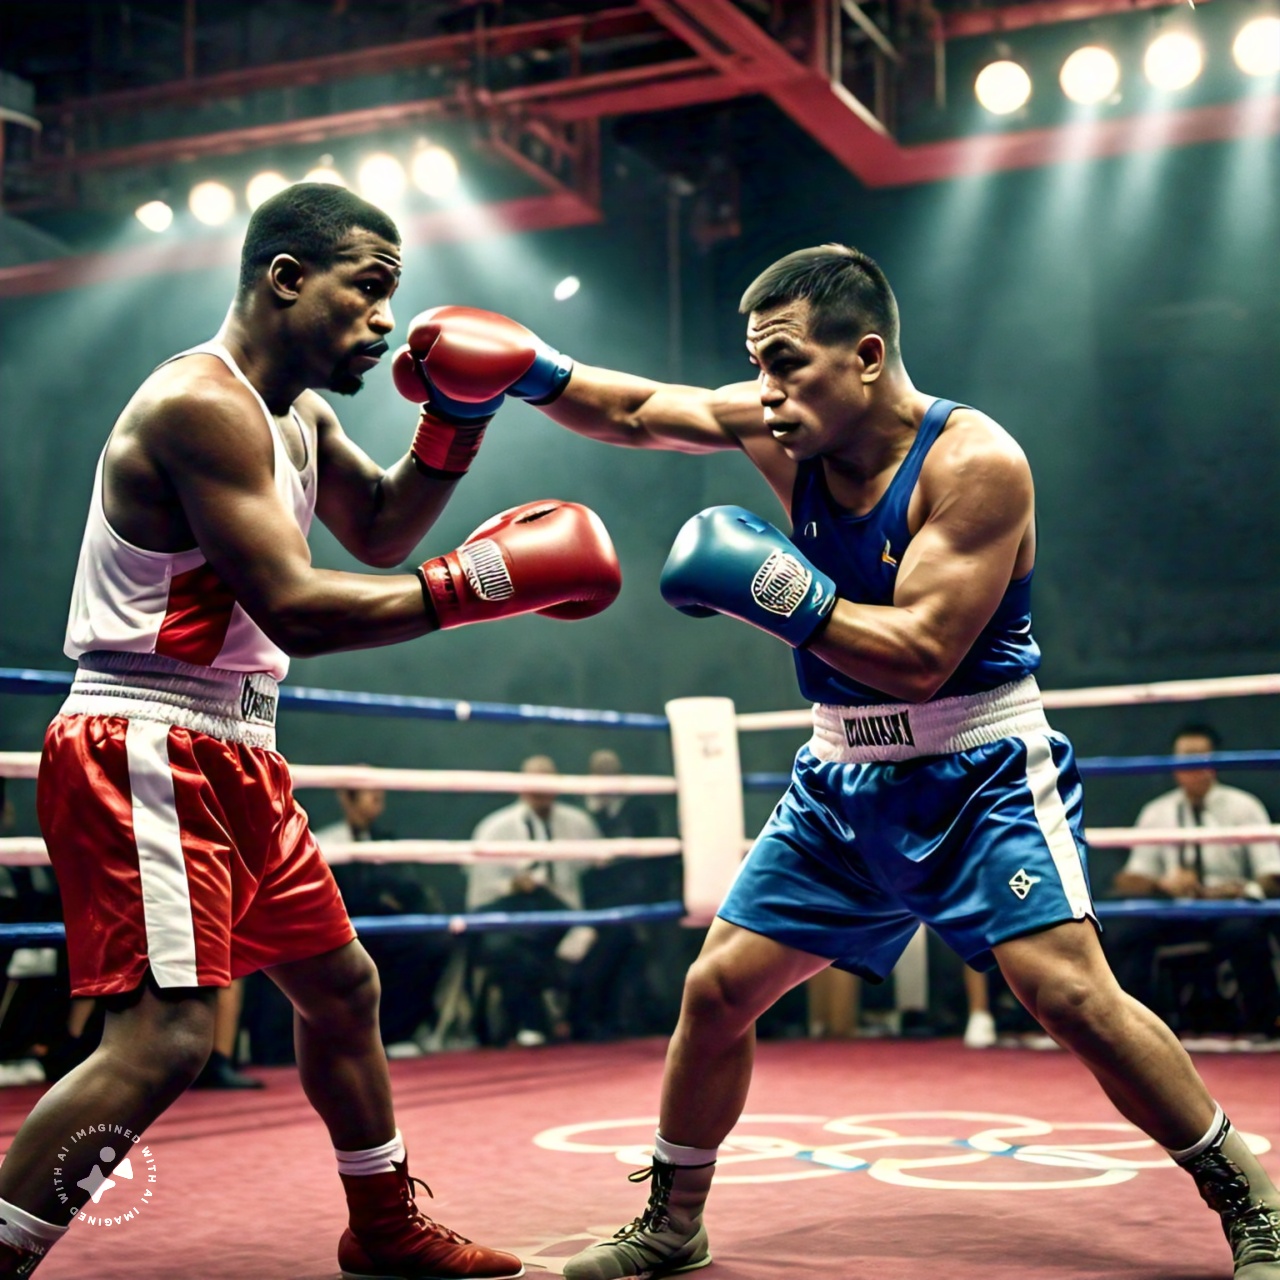 Boxing in the Olympic Games